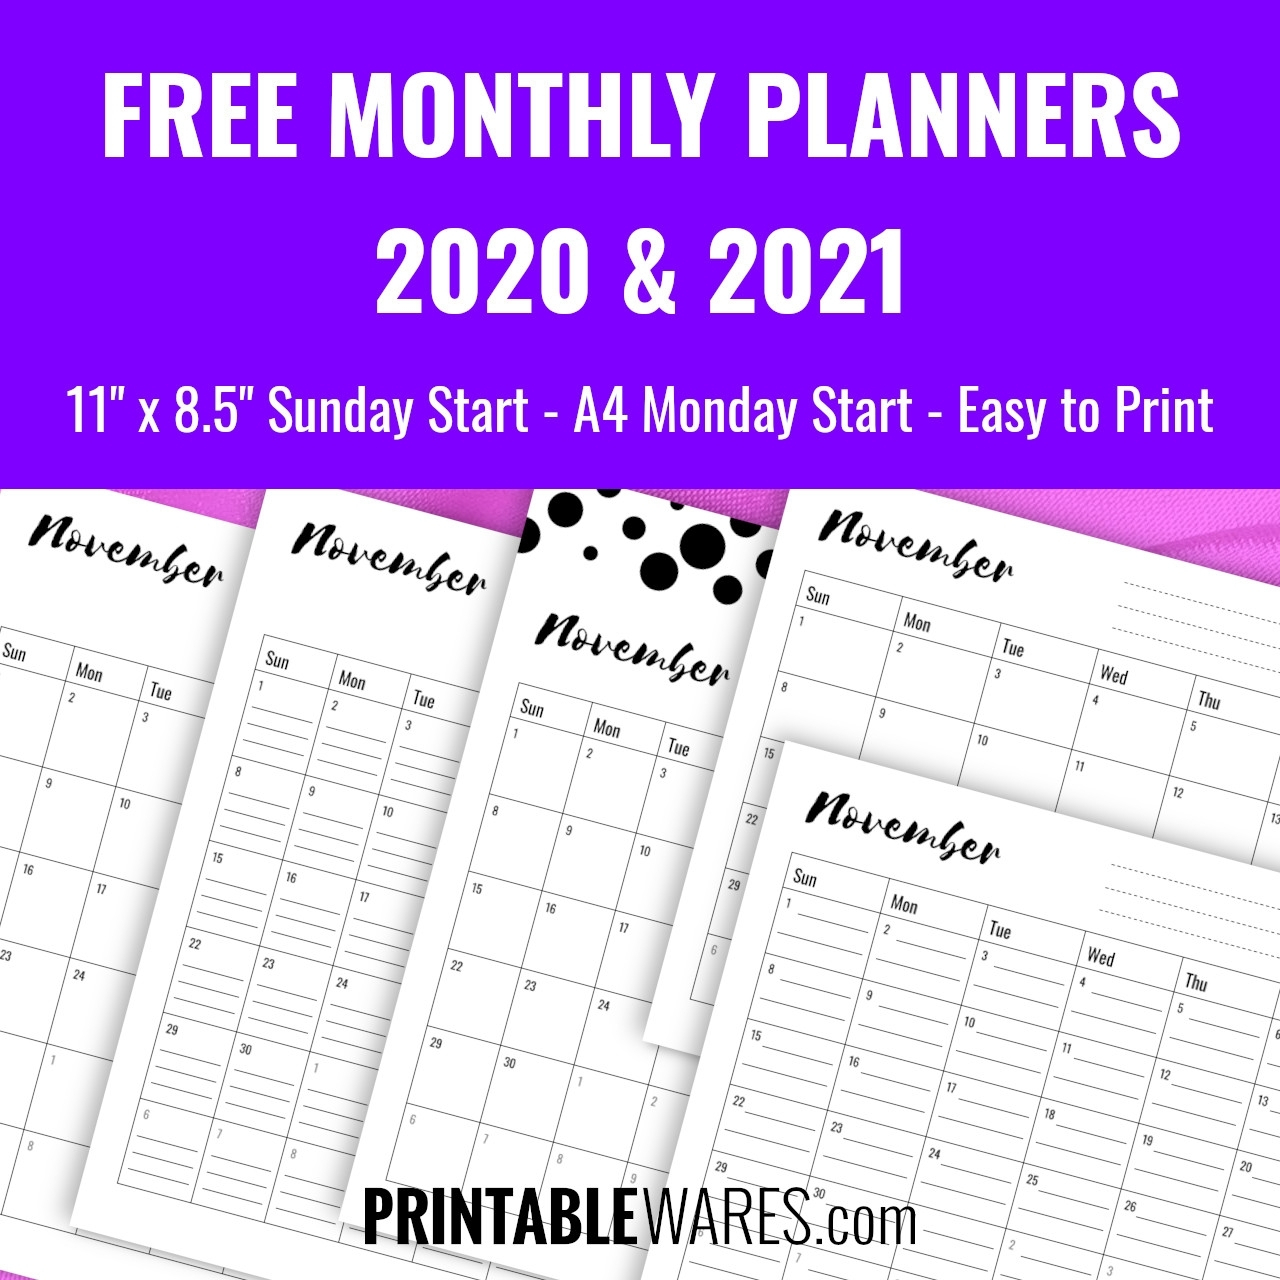 Free Printable 2021 Calendar Monthly Planner Lined within 2021 Printable Calendar By Month With Lines